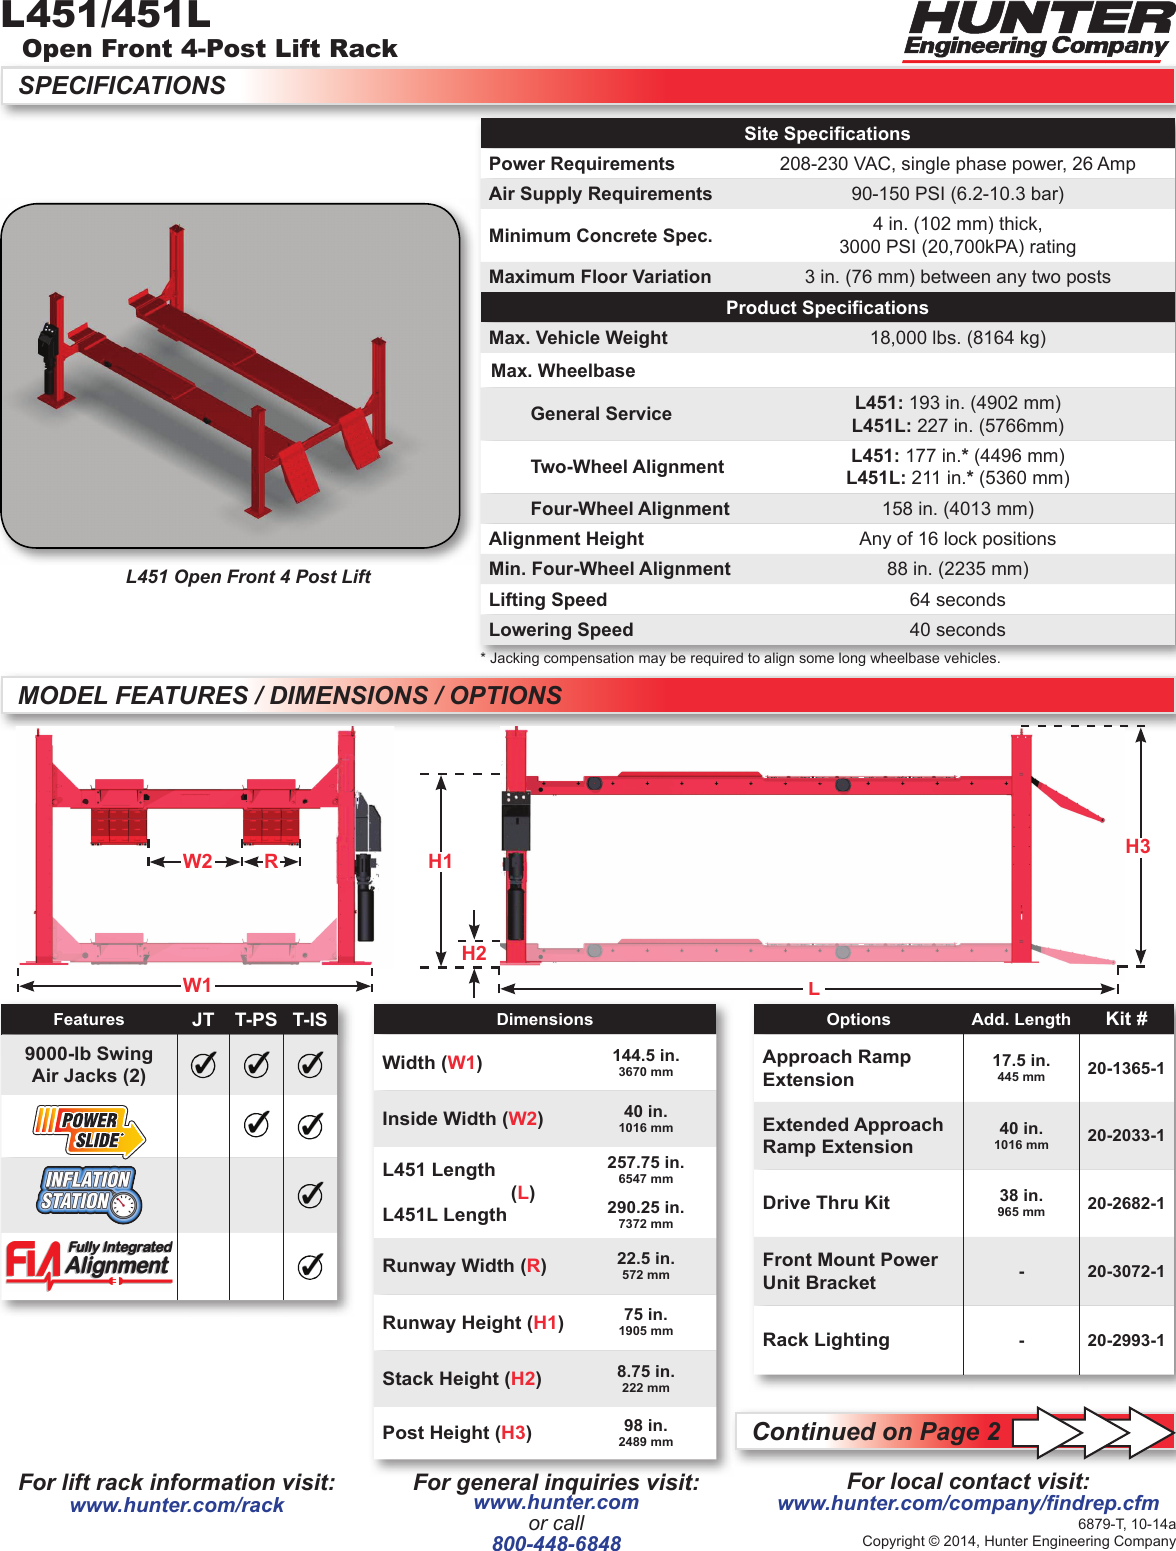 Page 1 of 2 - Hunter-Engineering Hunter-Engineering-6879-T-Specification-Sheet- L451/451L Open Front 4-Post Lift Rack Spec Sheet  Hunter-engineering-6879-t-specification-sheet